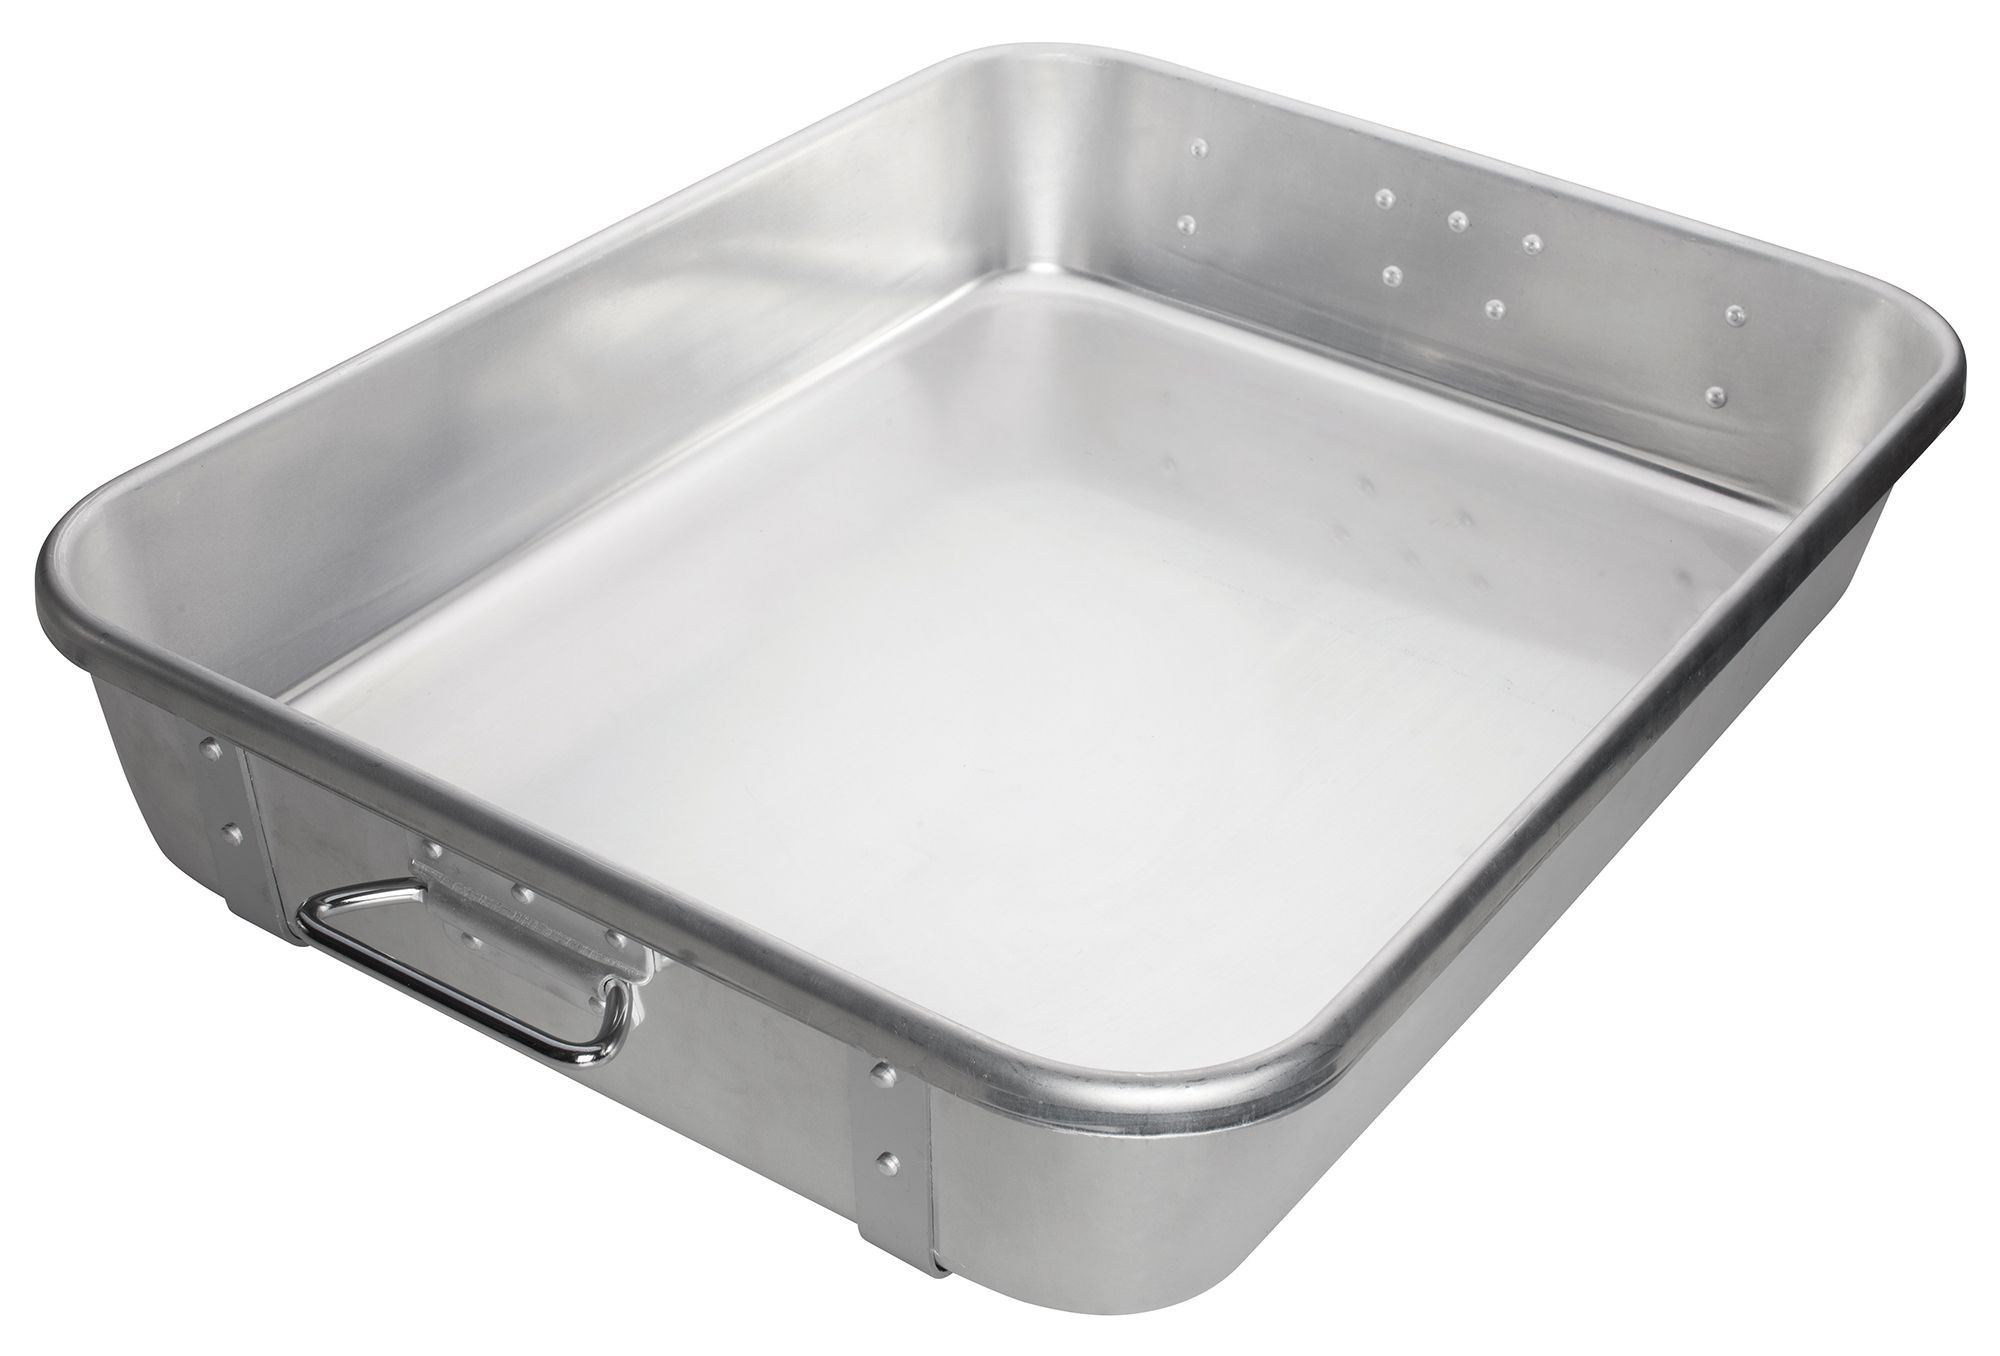 Winco ALRP-1824 Aluminum Double Roasting Pan with Straps 18" x 24" x 4-1/2"